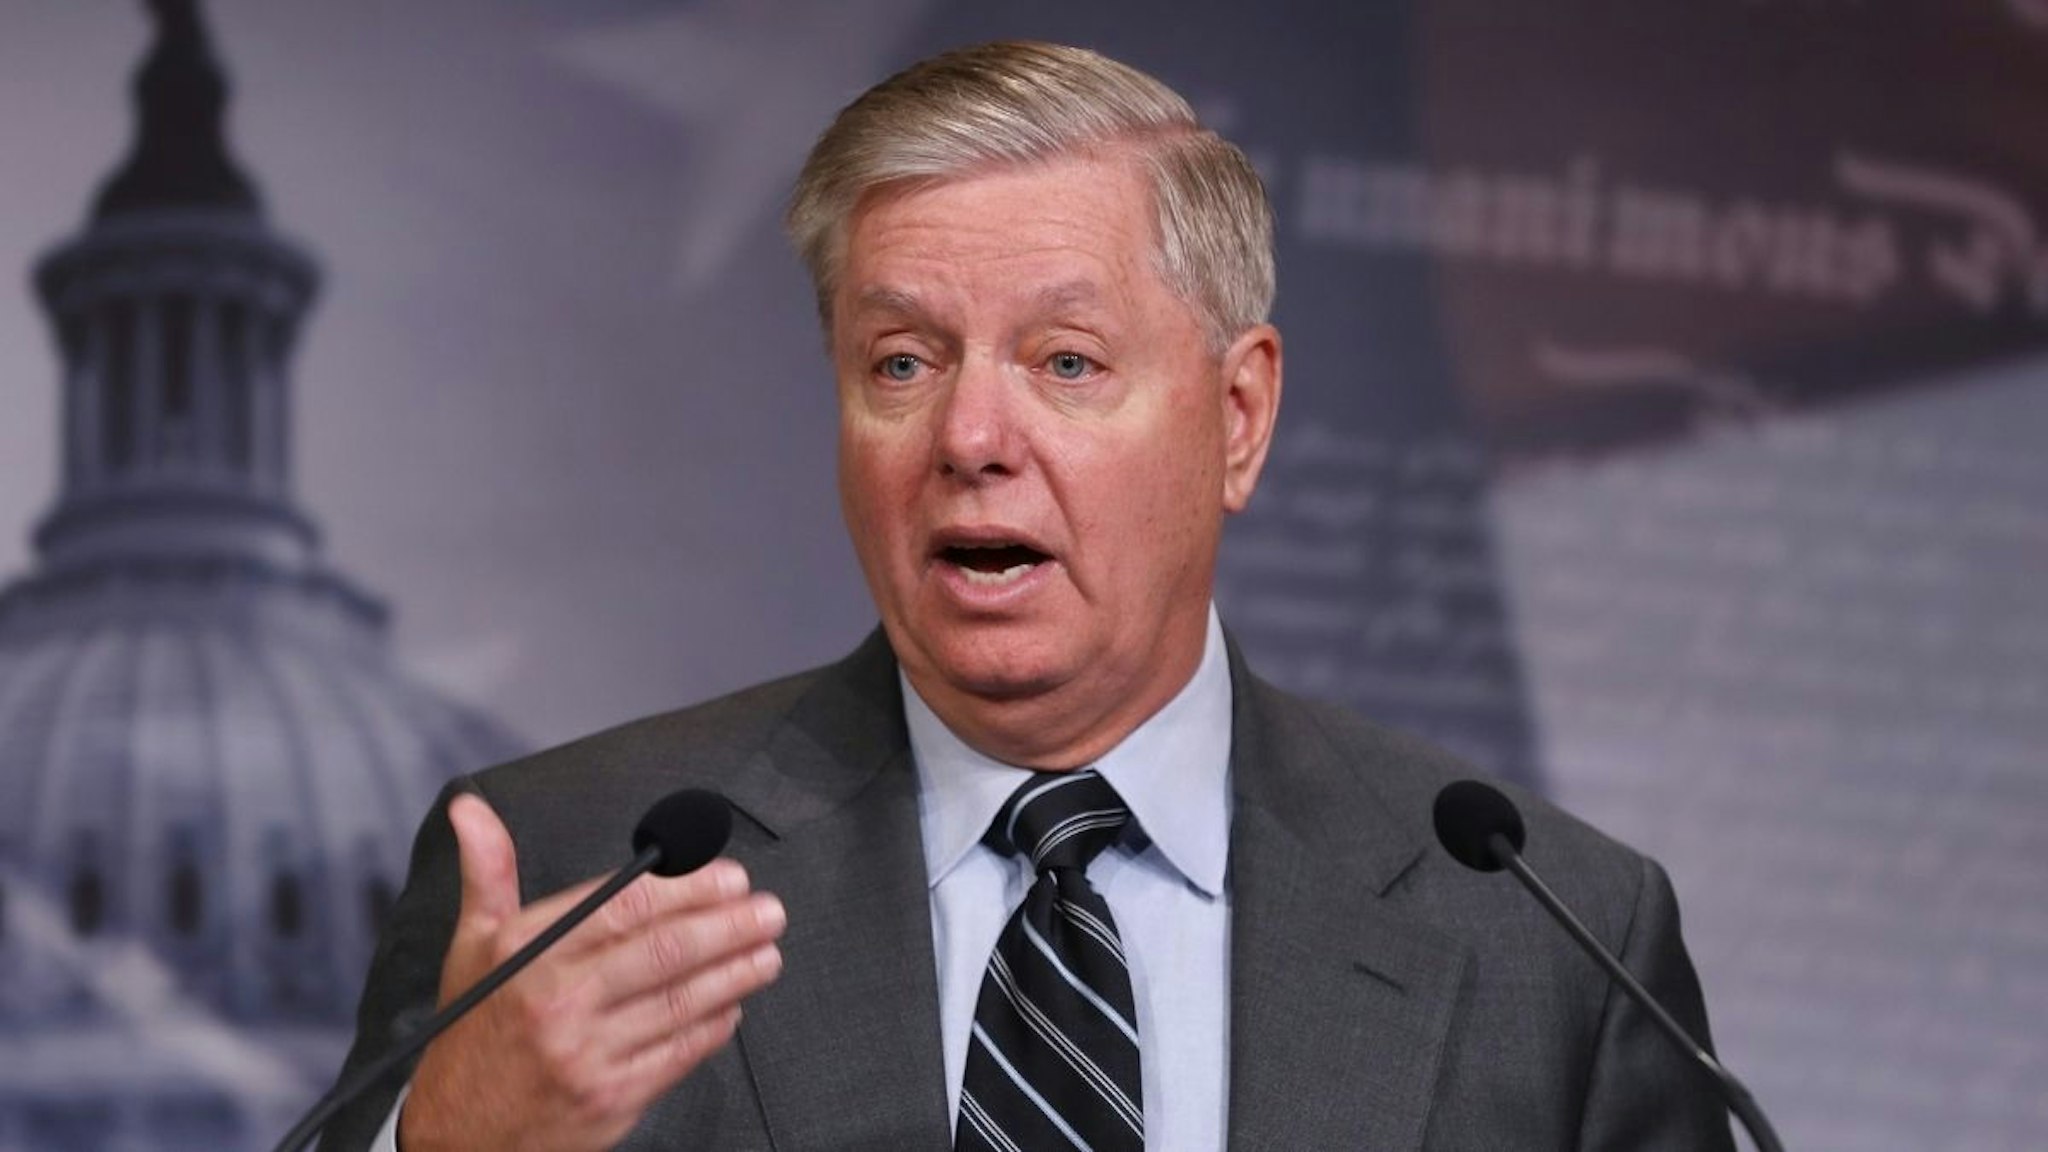 Senate Judiciary Committee Chairman Lindsey Graham (R-SC) holds a news conference following the release of the Department of Justice's inspector general report on FBI investigation of Donald Trump's presidential campaign at the U.S.